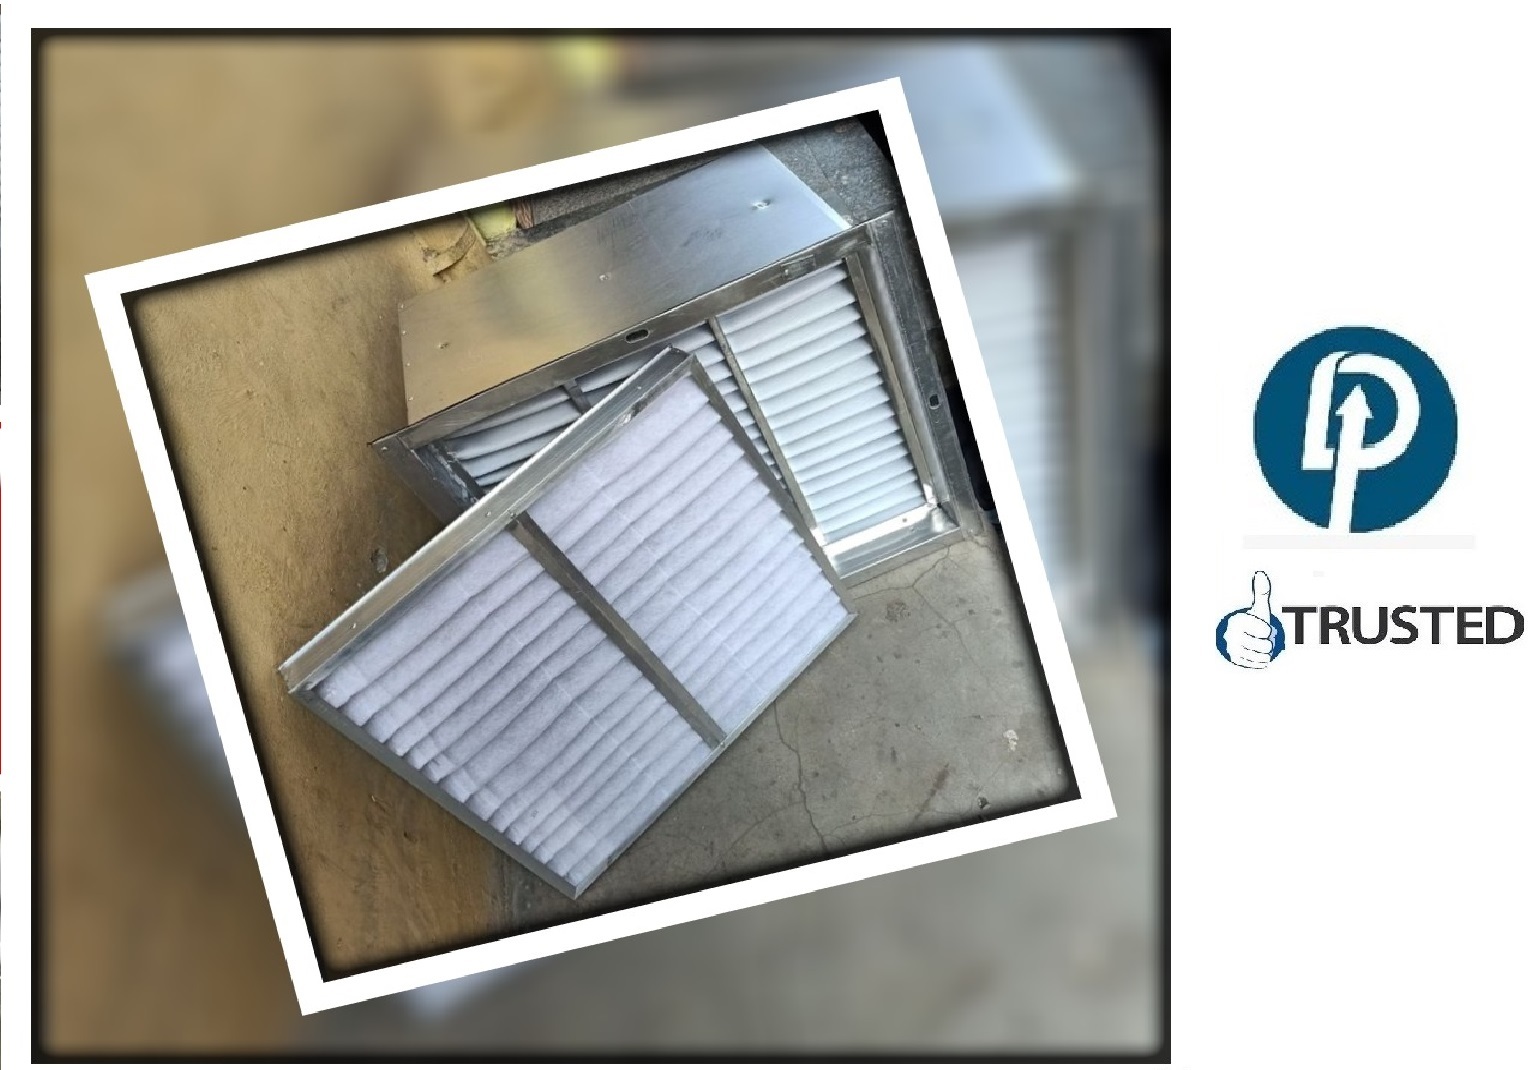 Leading Supplier of AHU ( Air Handling Unit) Filter by Ghaziabad (U.P.)